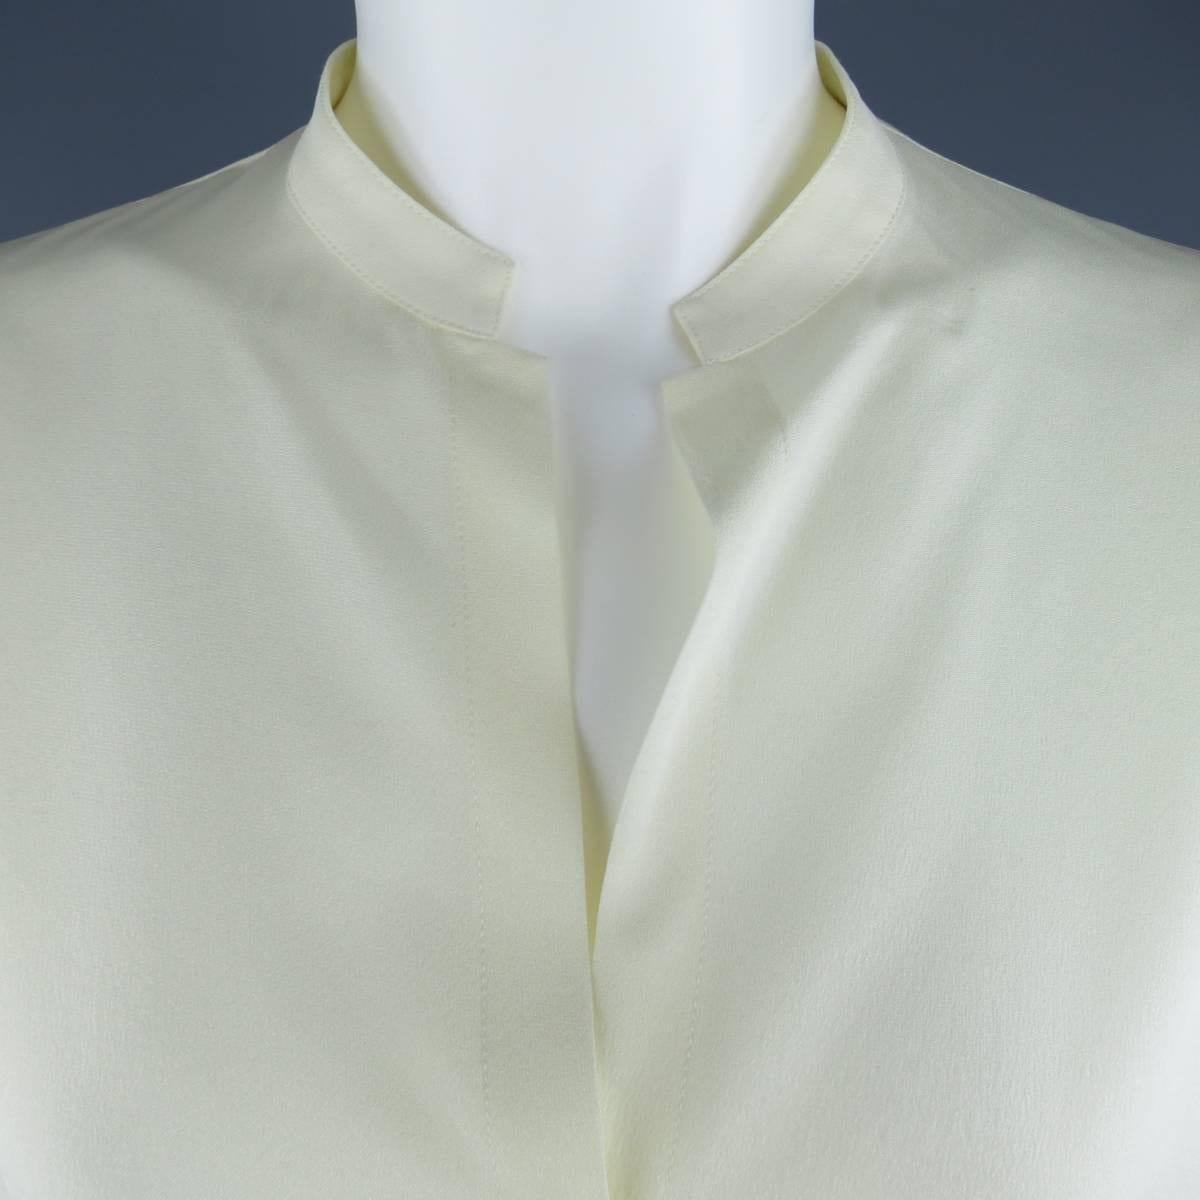 Vintage 1990's GIANNI VERSACE Couture blouse comes in a light weight cream silk crepe chiffon and features a band collar, v neckline, and long sleeves. Made in Italy.
 
Excellent Pre-Owned Condition.
Marked: IT 40
 
Measurements:
 
Shoulder: 19